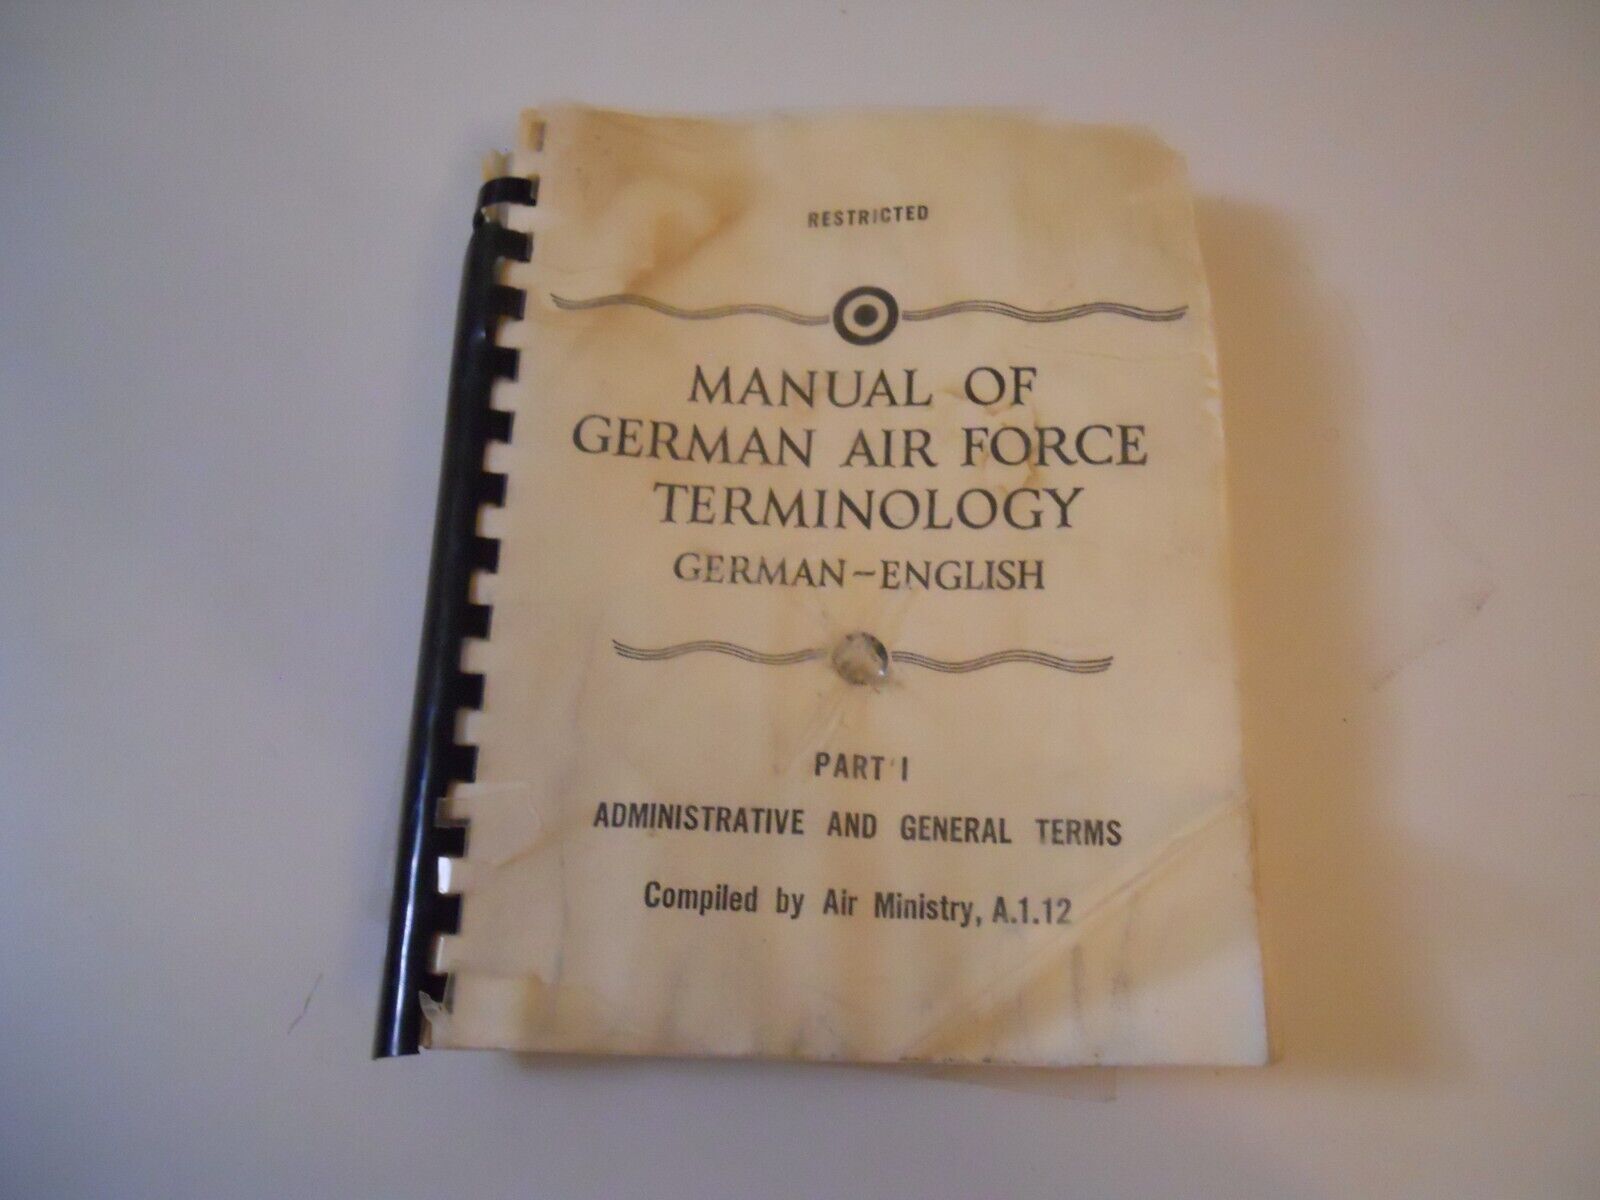 Manual of German air force technology terms German/English used; see description